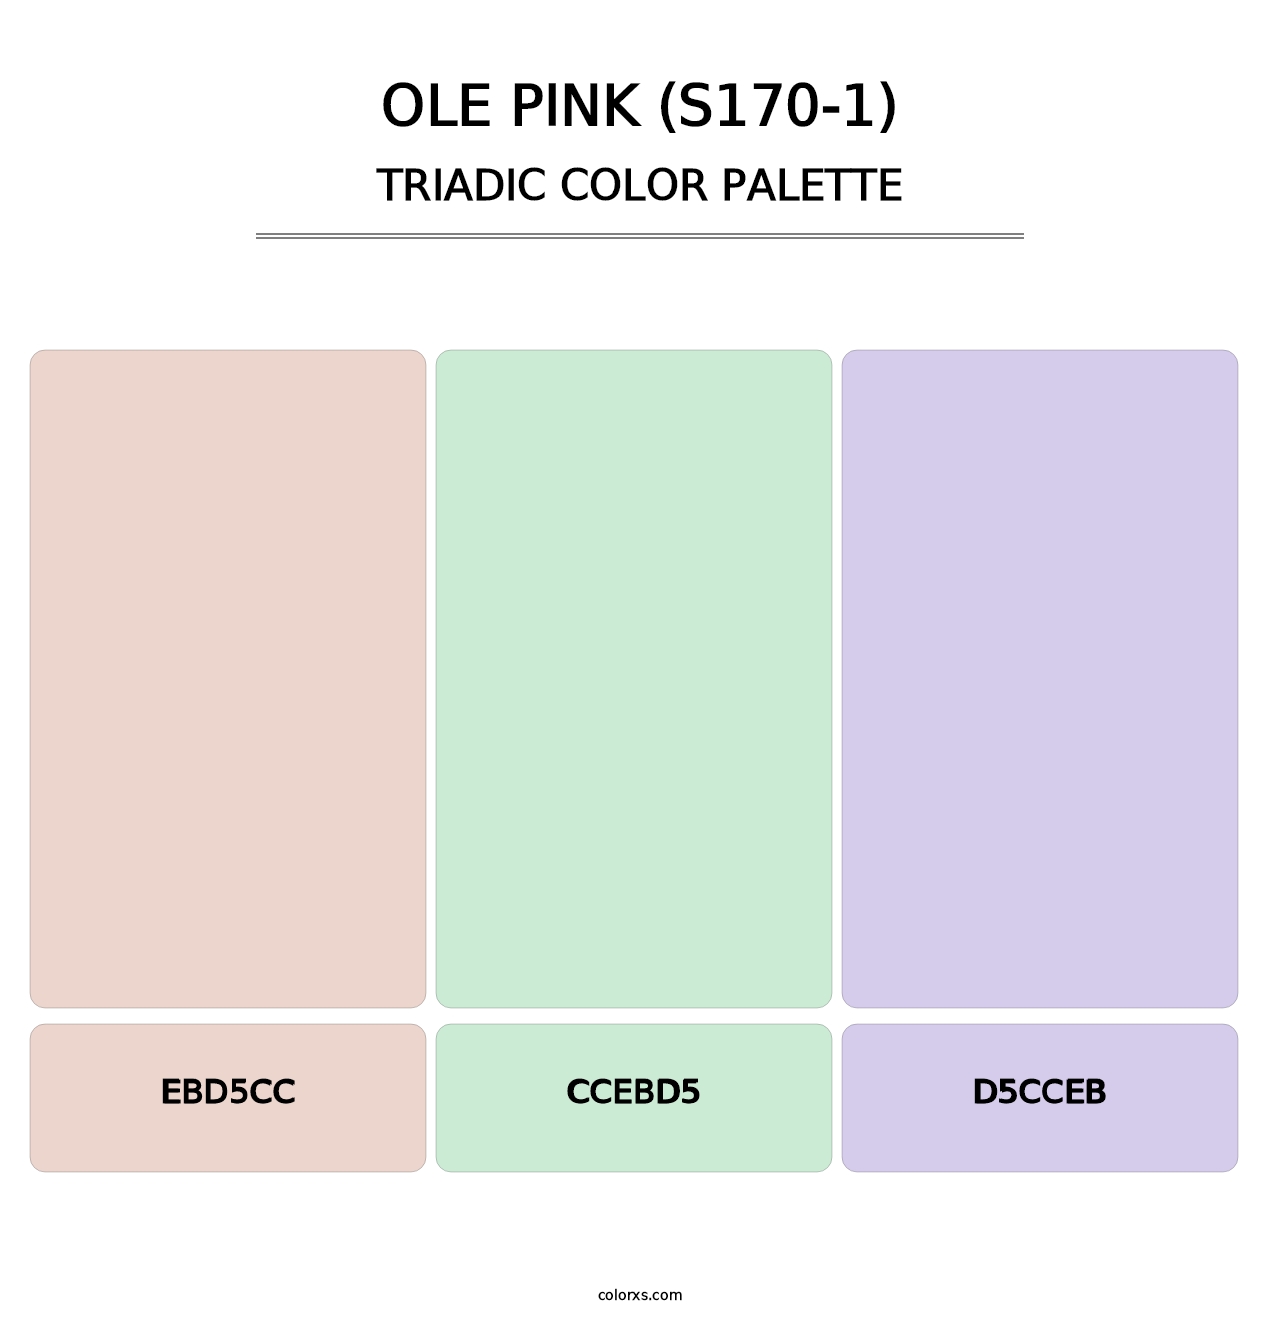 Ole Pink (S170-1) - Triadic Color Palette